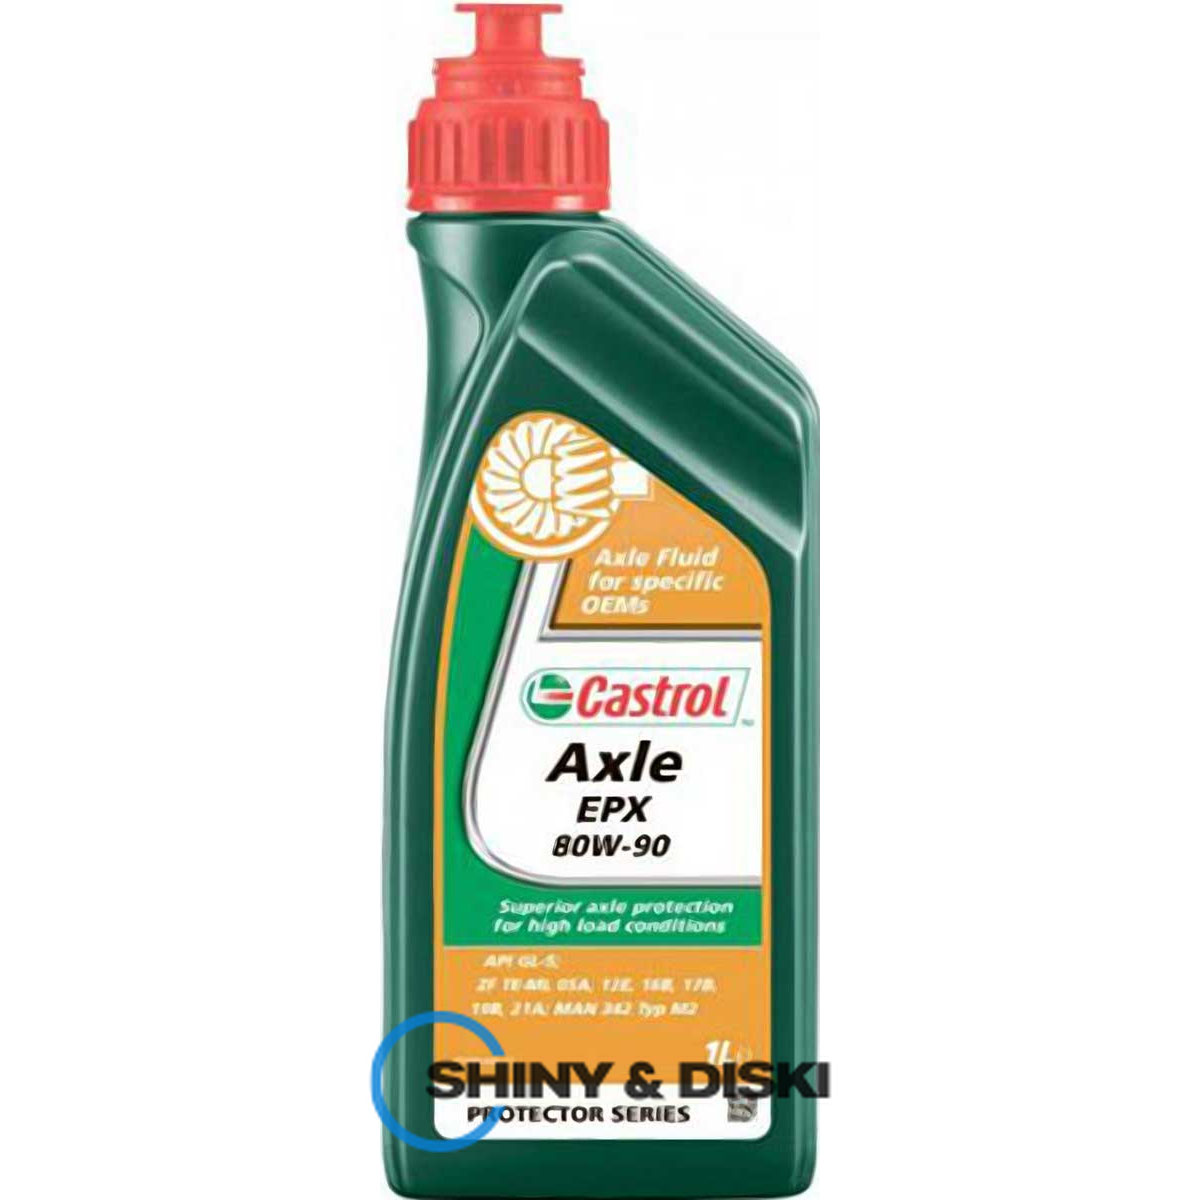 castrol axle epx